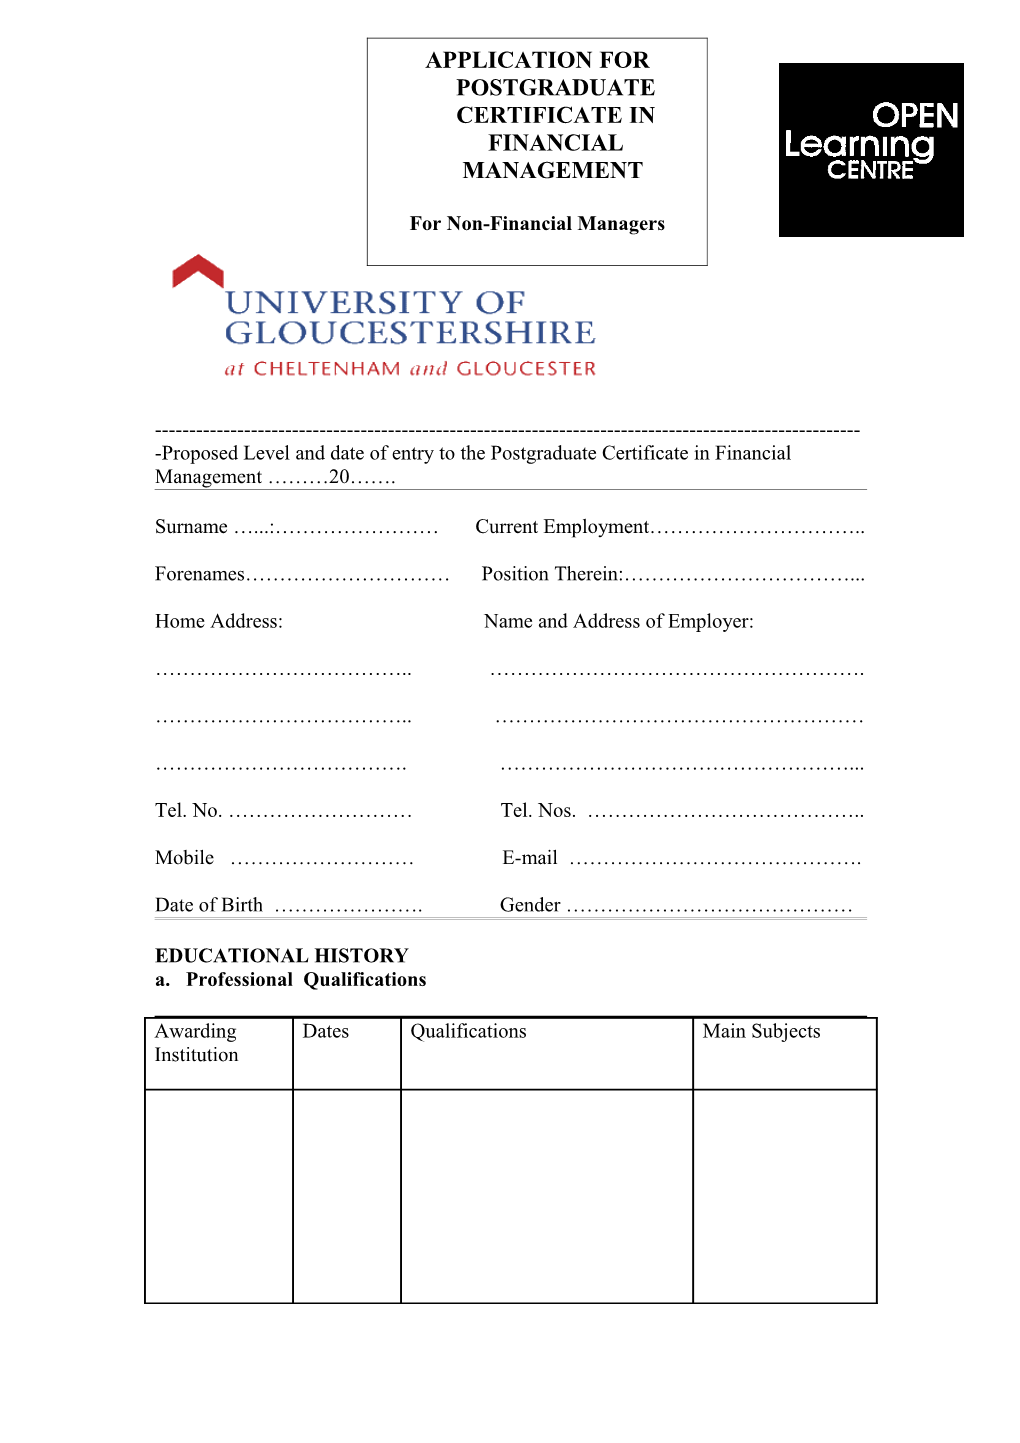 Proposed Level and Date of Entry to the Postgraduate Certificate in Financial Management 20